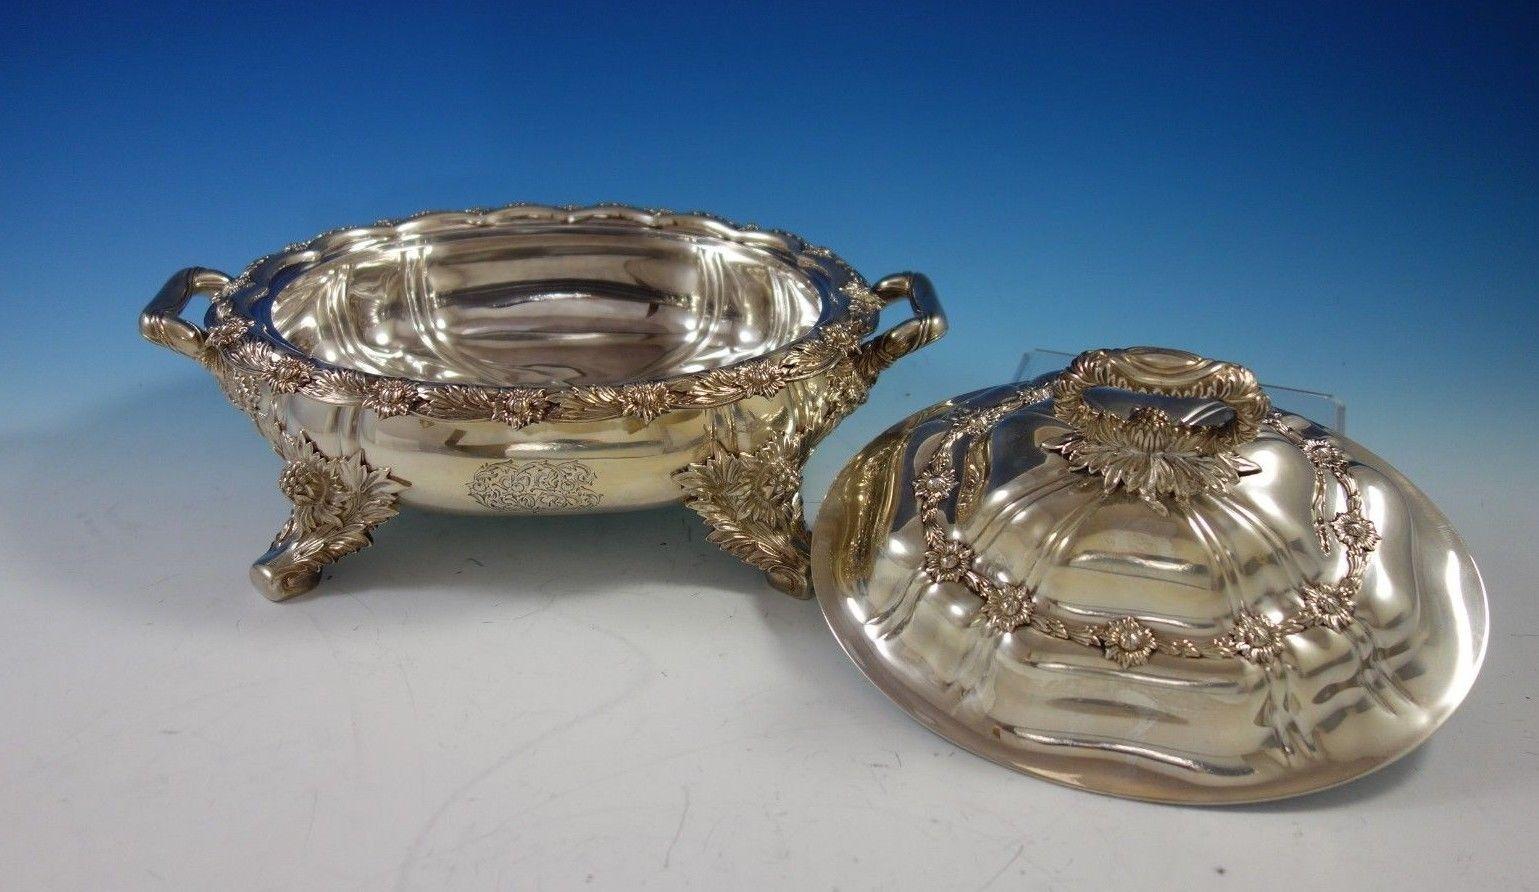 Chrysanthemum by Tiffany & Co. Sterling Silver Vegetable Dish Covered In Excellent Condition For Sale In Big Bend, WI